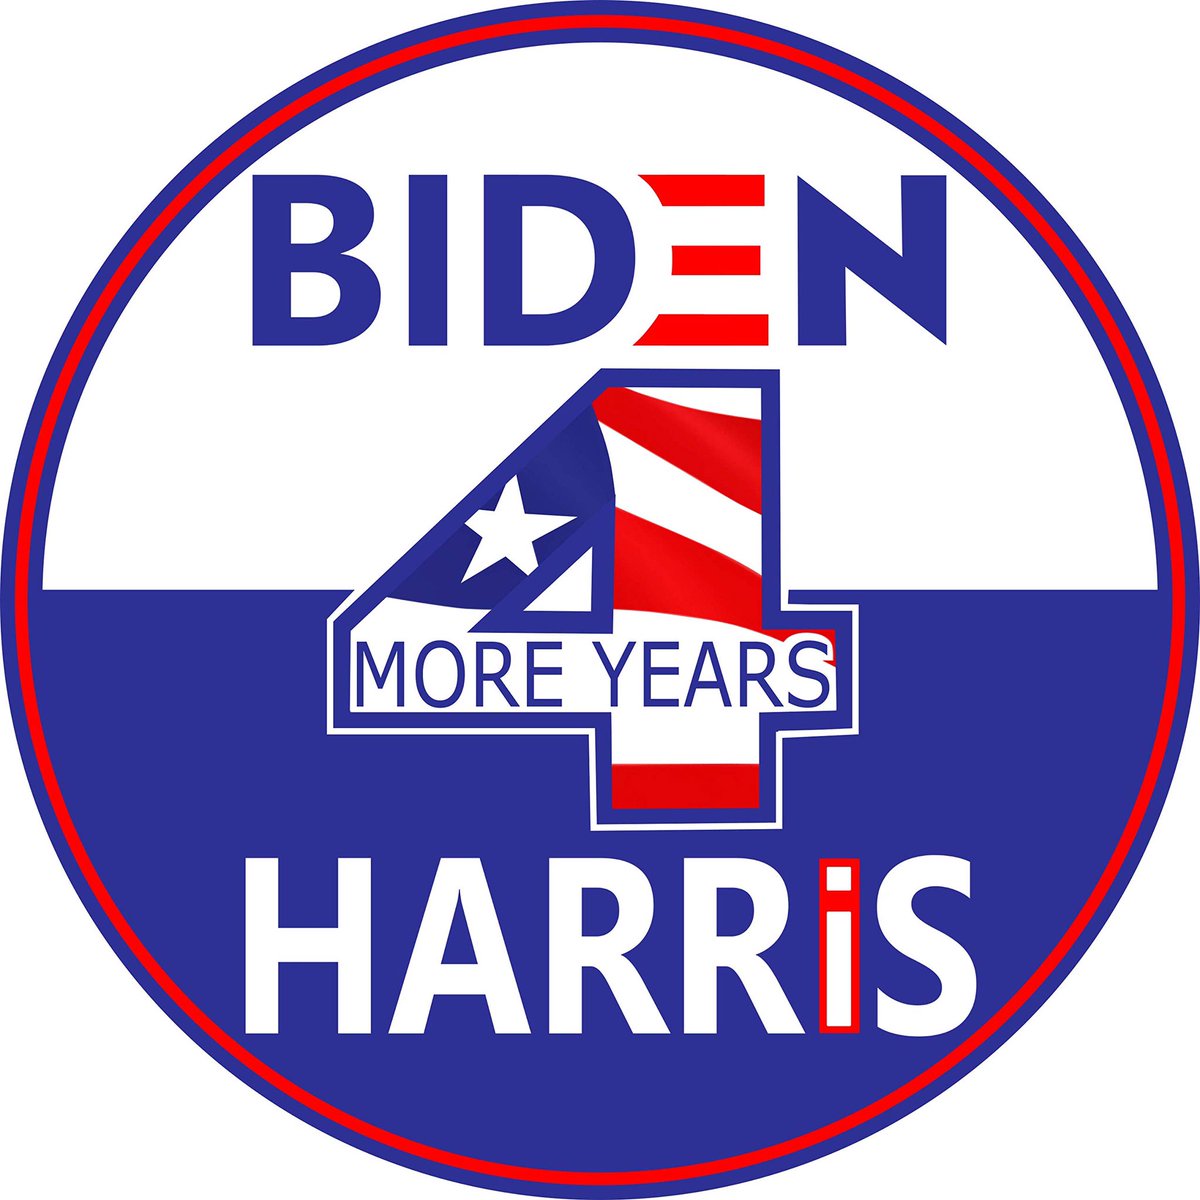 If you want more Blue Friends, please drop a 💙

Stronger Together 
Let’s connect and support each other

Meet other Democrats 
#MeetTheDems 💙
#VoteBlue2024 

➡️ Biden Harris 4 More Years ⬅️

💙We have a lot of work to do☮️

Please Like and Repost to share with other Blue